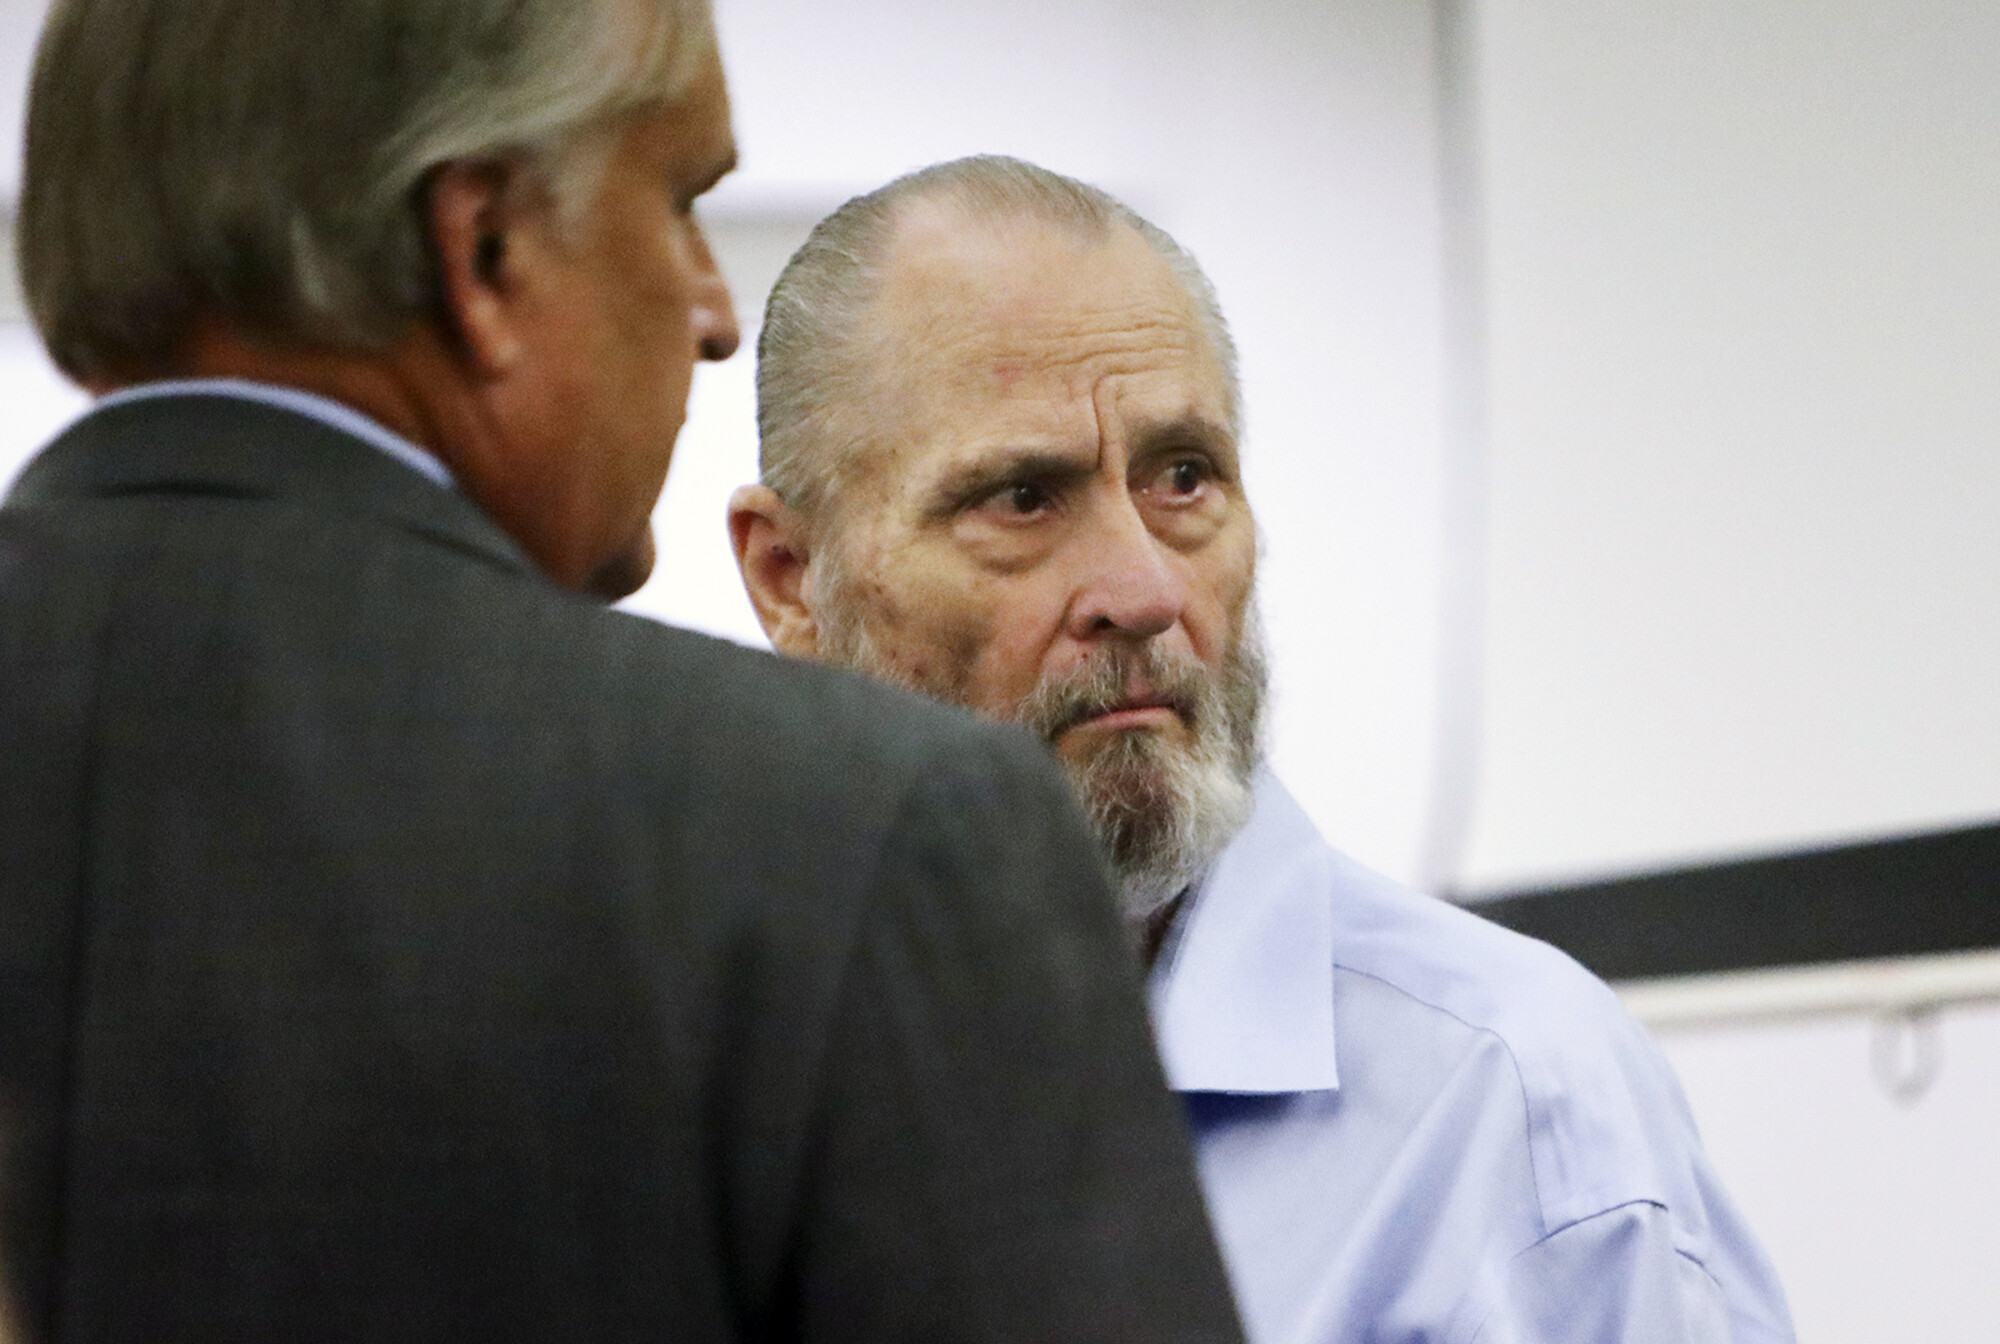 Man Pleads Guilty to 1974 Slaying of 17-Year-Old Texas Girl